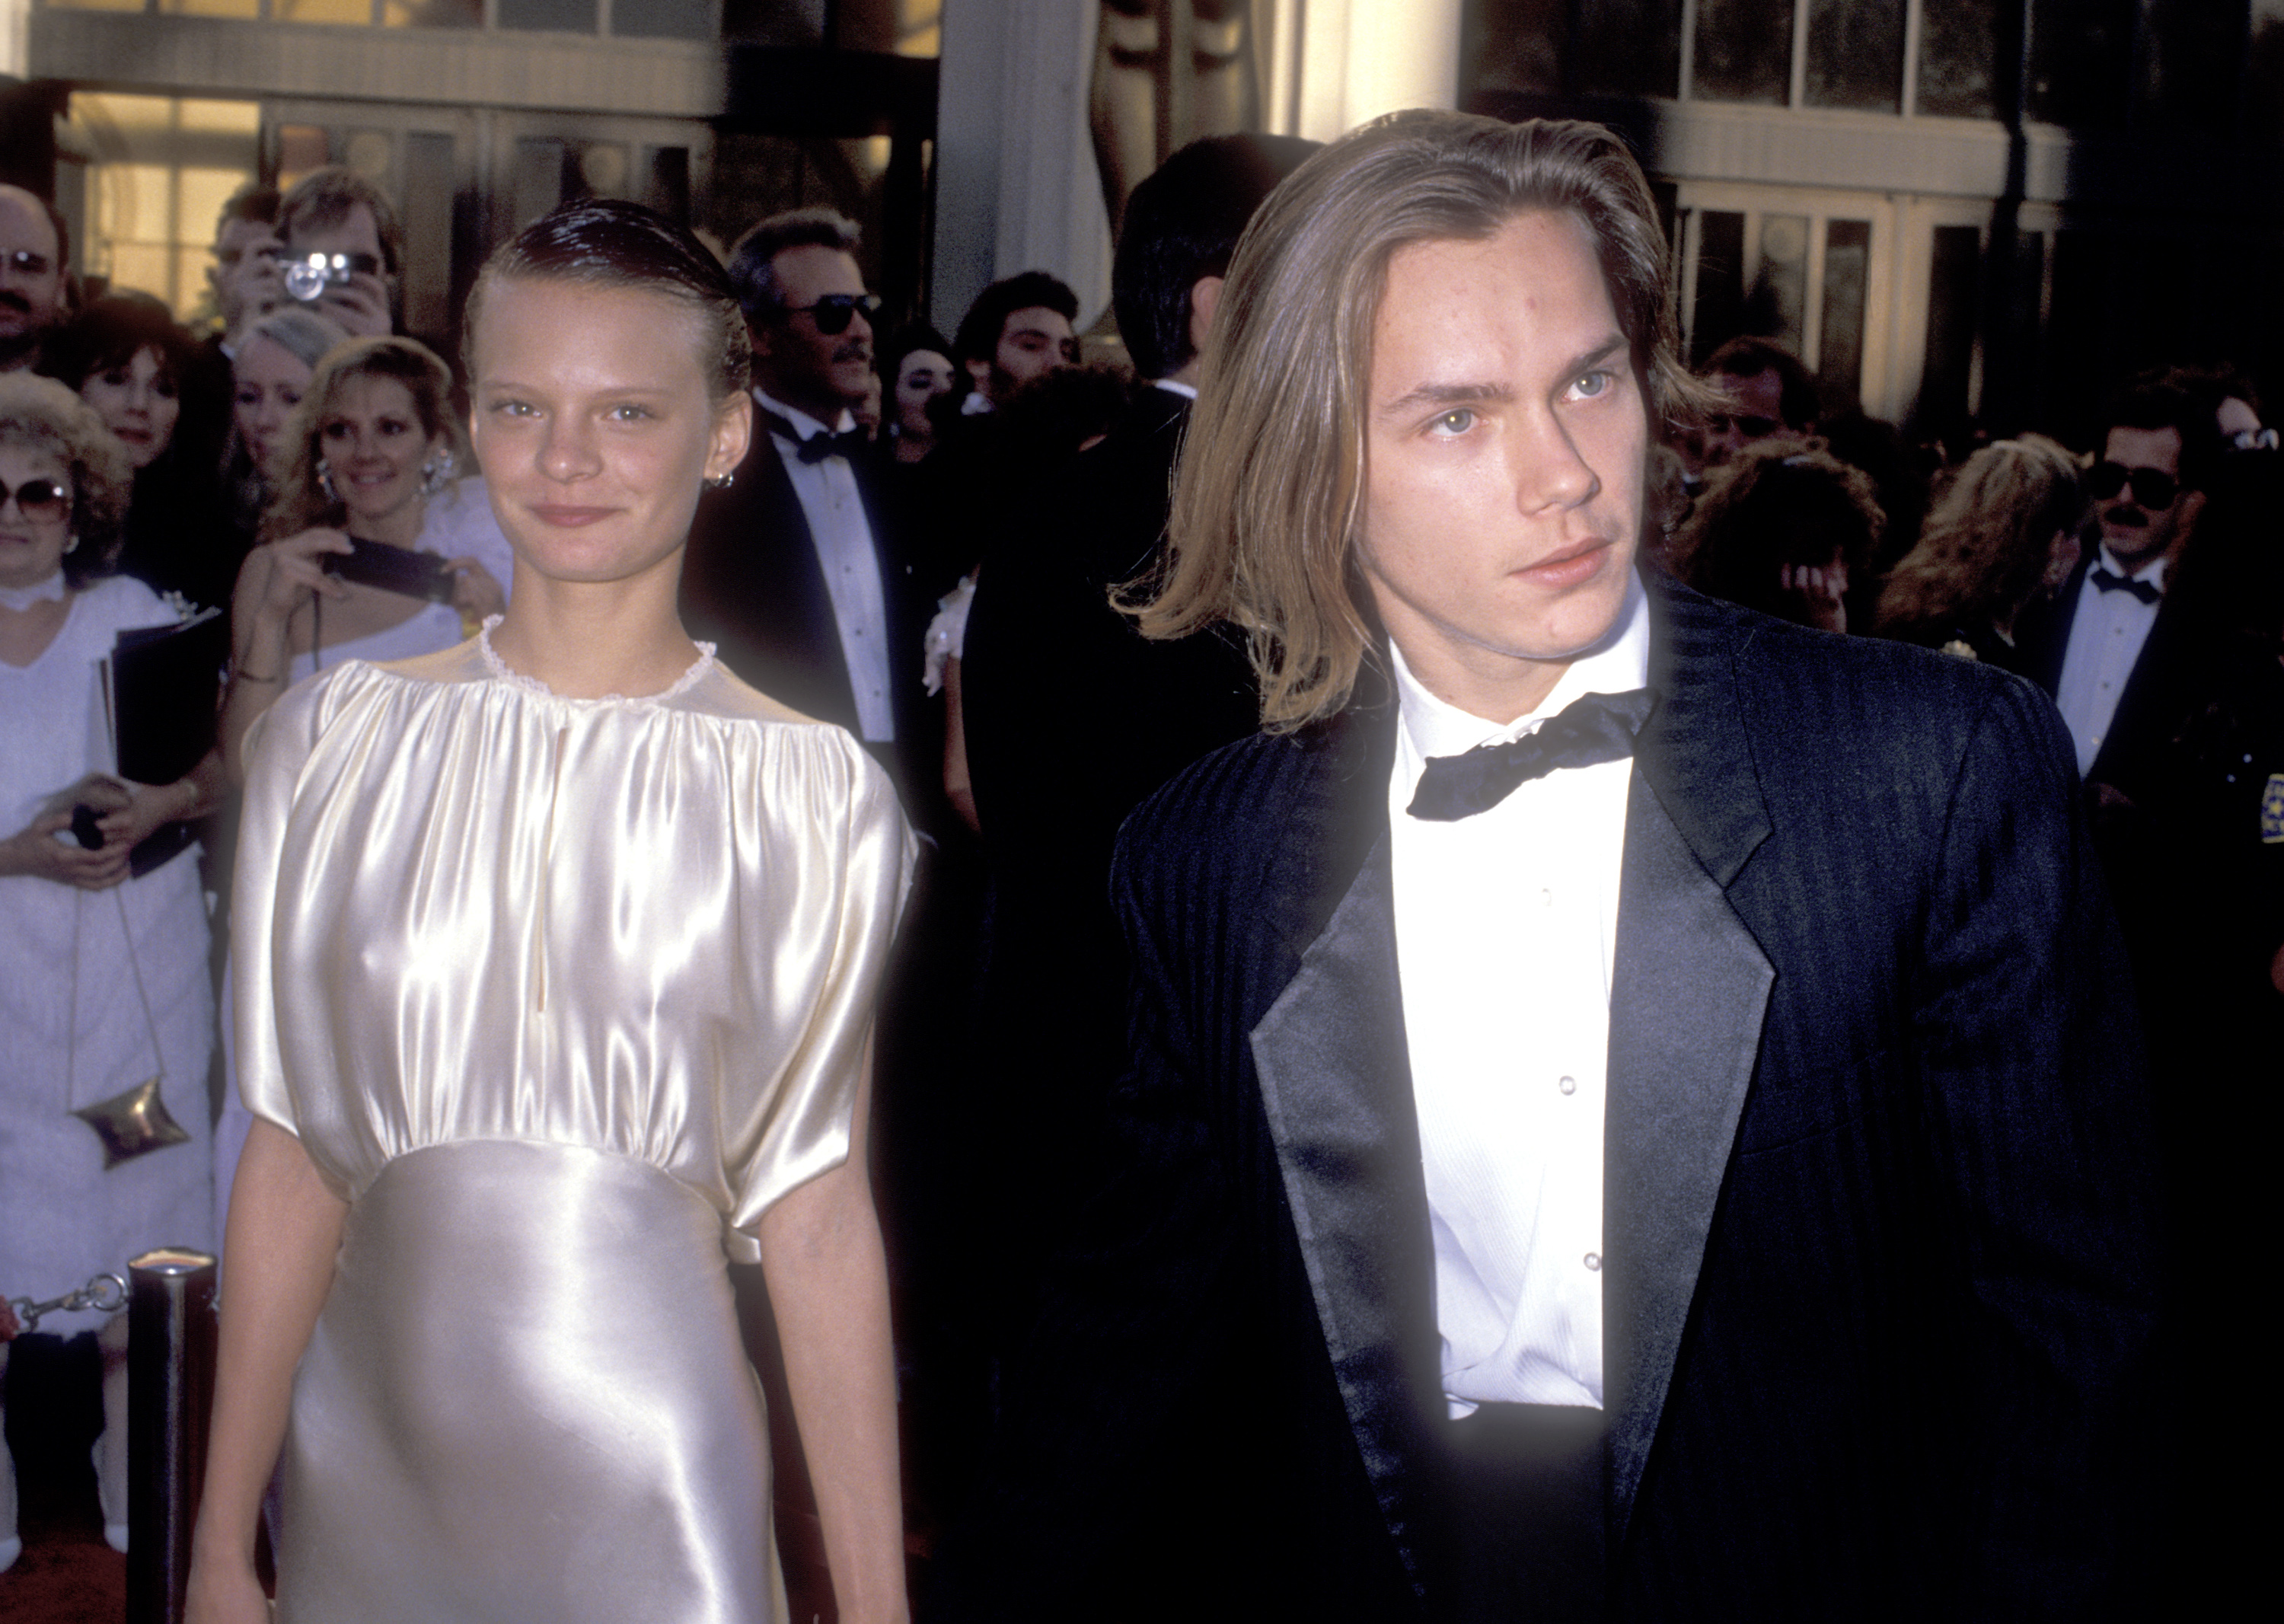 Martha Plimpton and River Phoenix at the 61st Annual Academy Awards on March 29, 1989, in Los Angeles, California. | Source: Getty Images